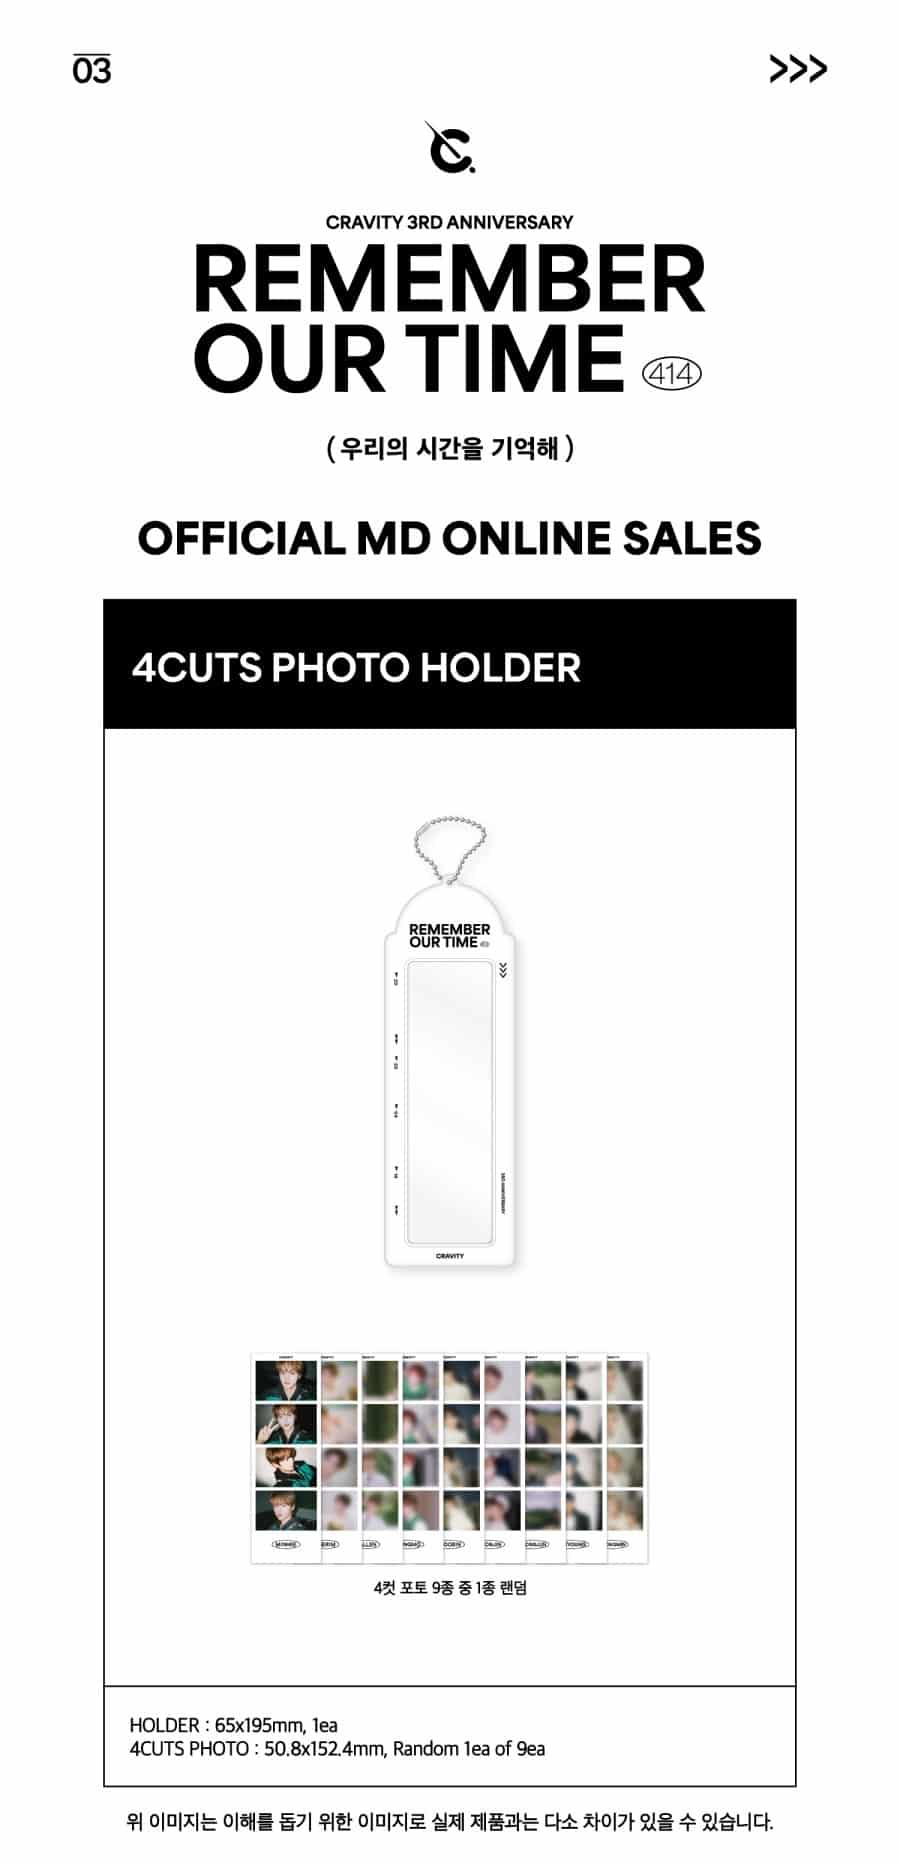 cravity-the-3rd-anniversary-pop-up-store-remember-our-time-4cuts-photo-holder-wholesales